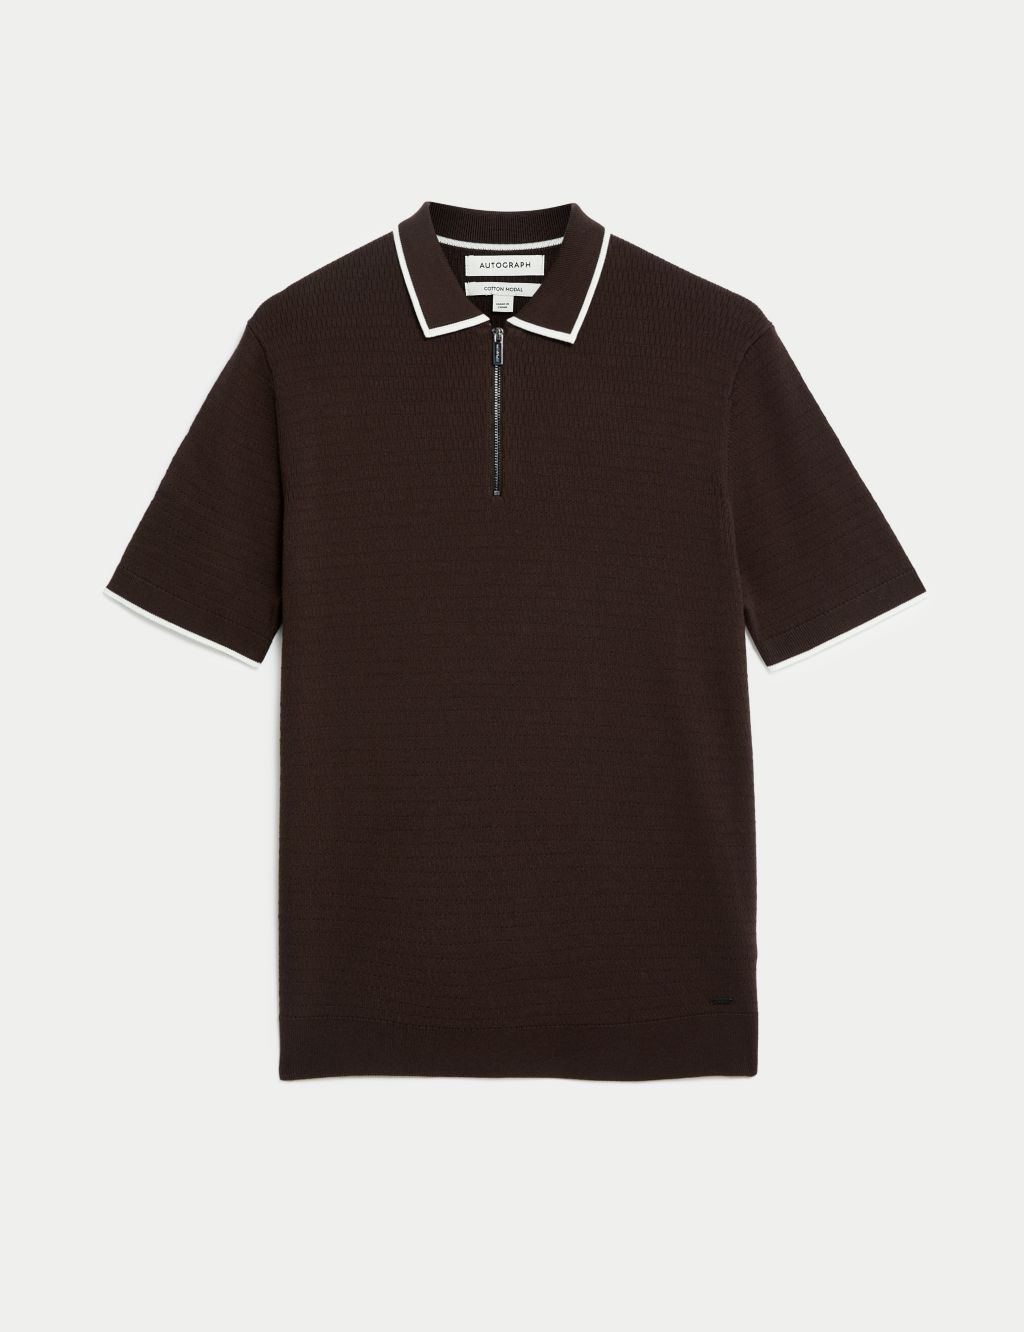 Cotton Blend Textured Knitted Polo Shirt image 2